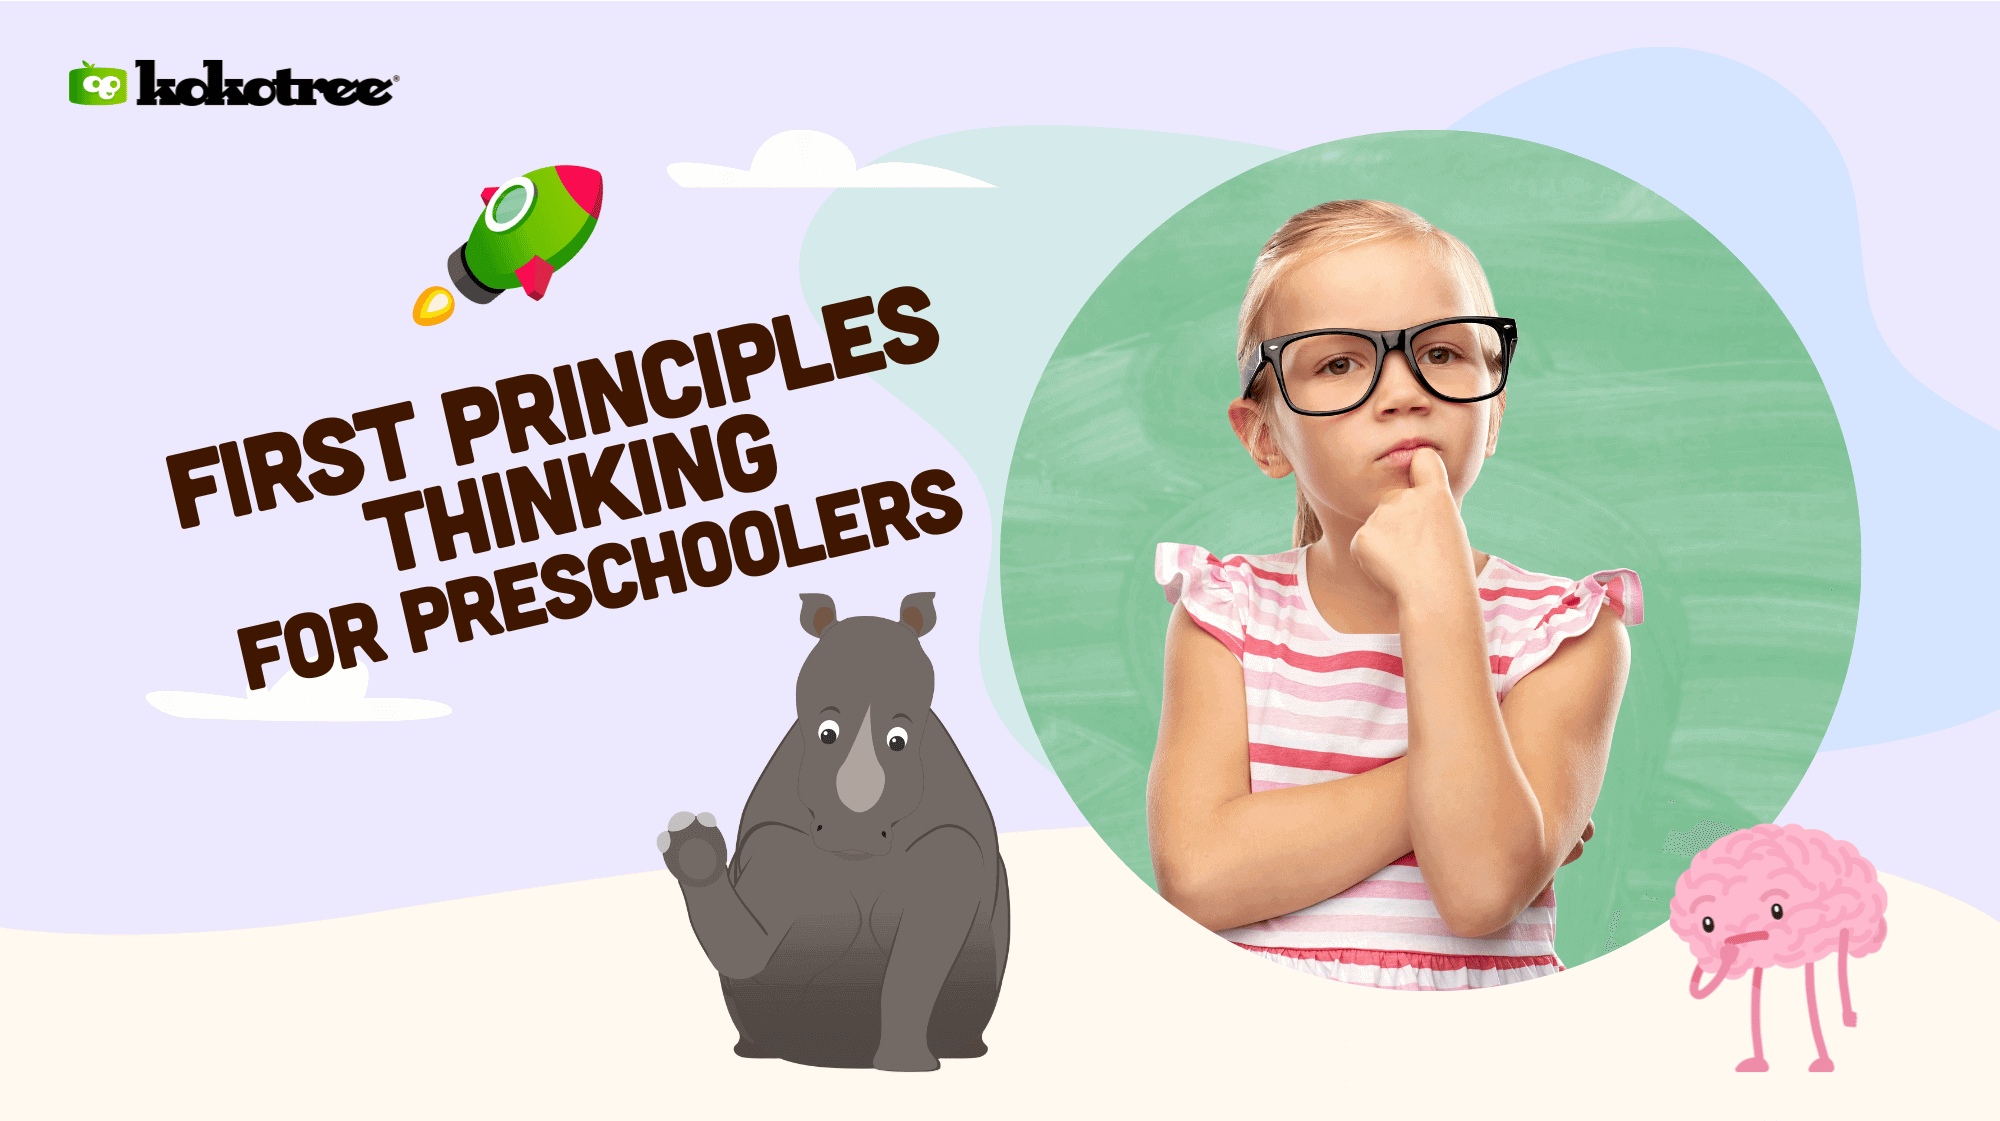 How to Teach Preschoolers First-Principles Thinking